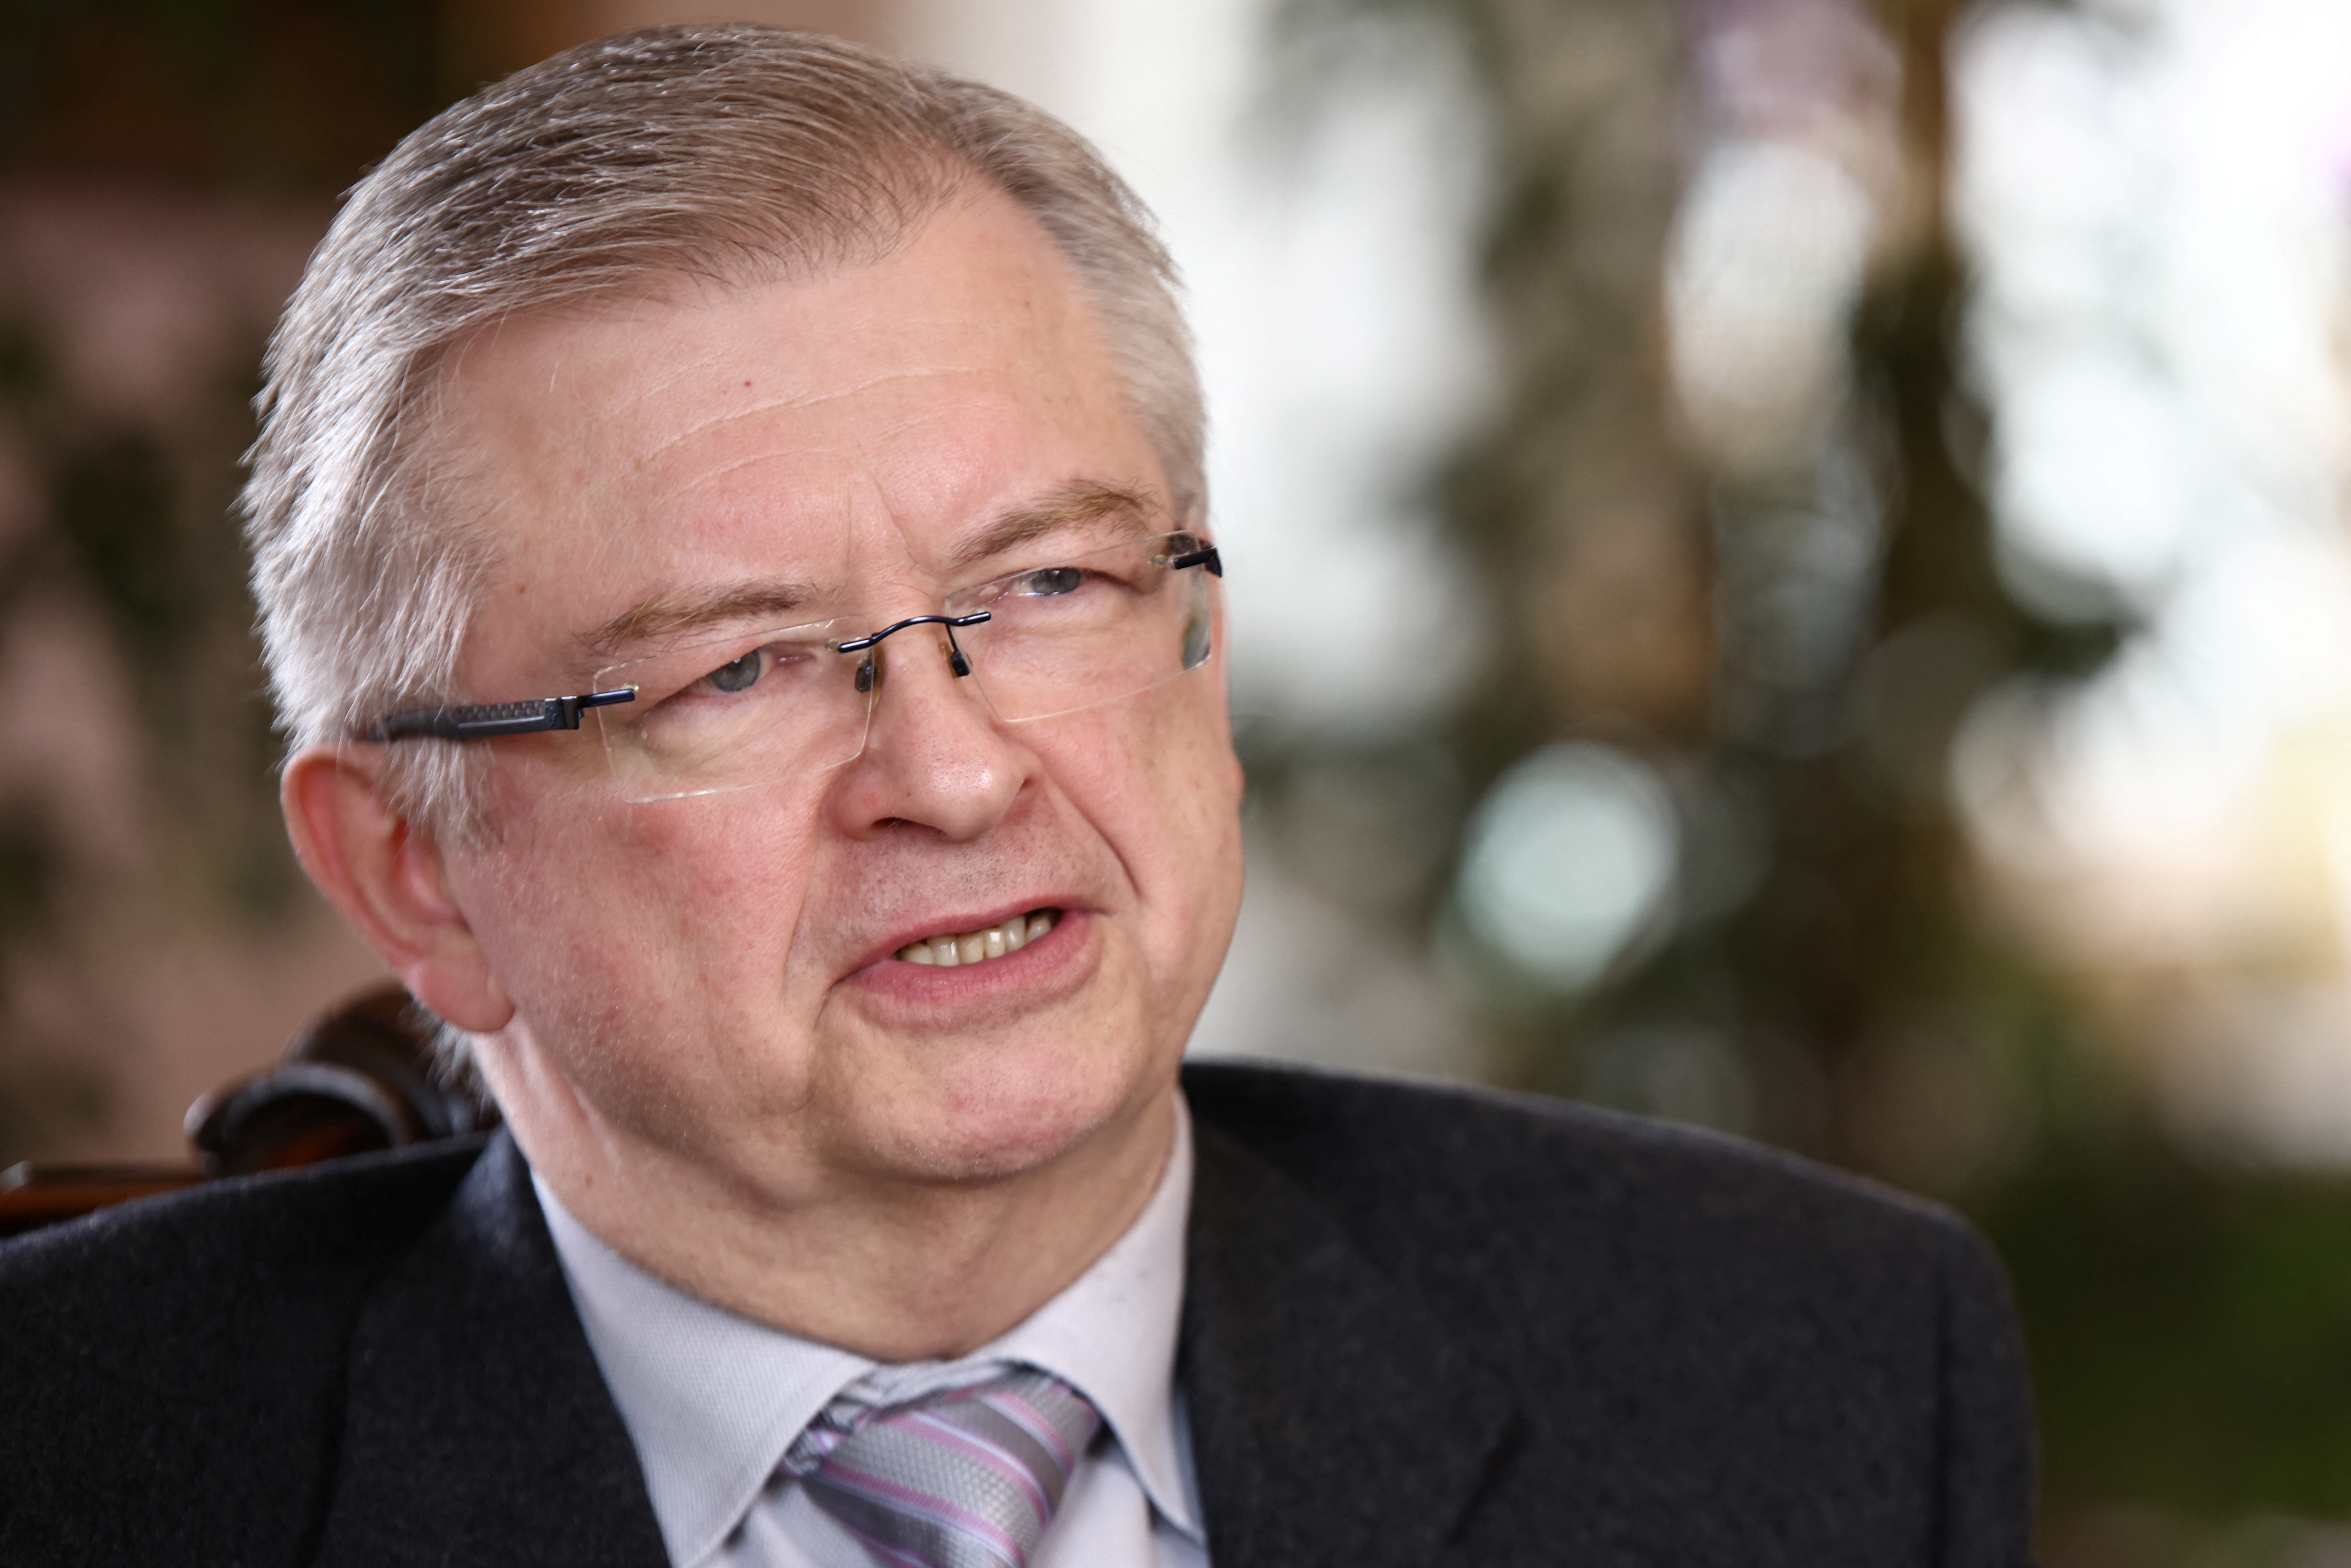 Russian Ambassador to Poland speaks during an interview in Warsaw